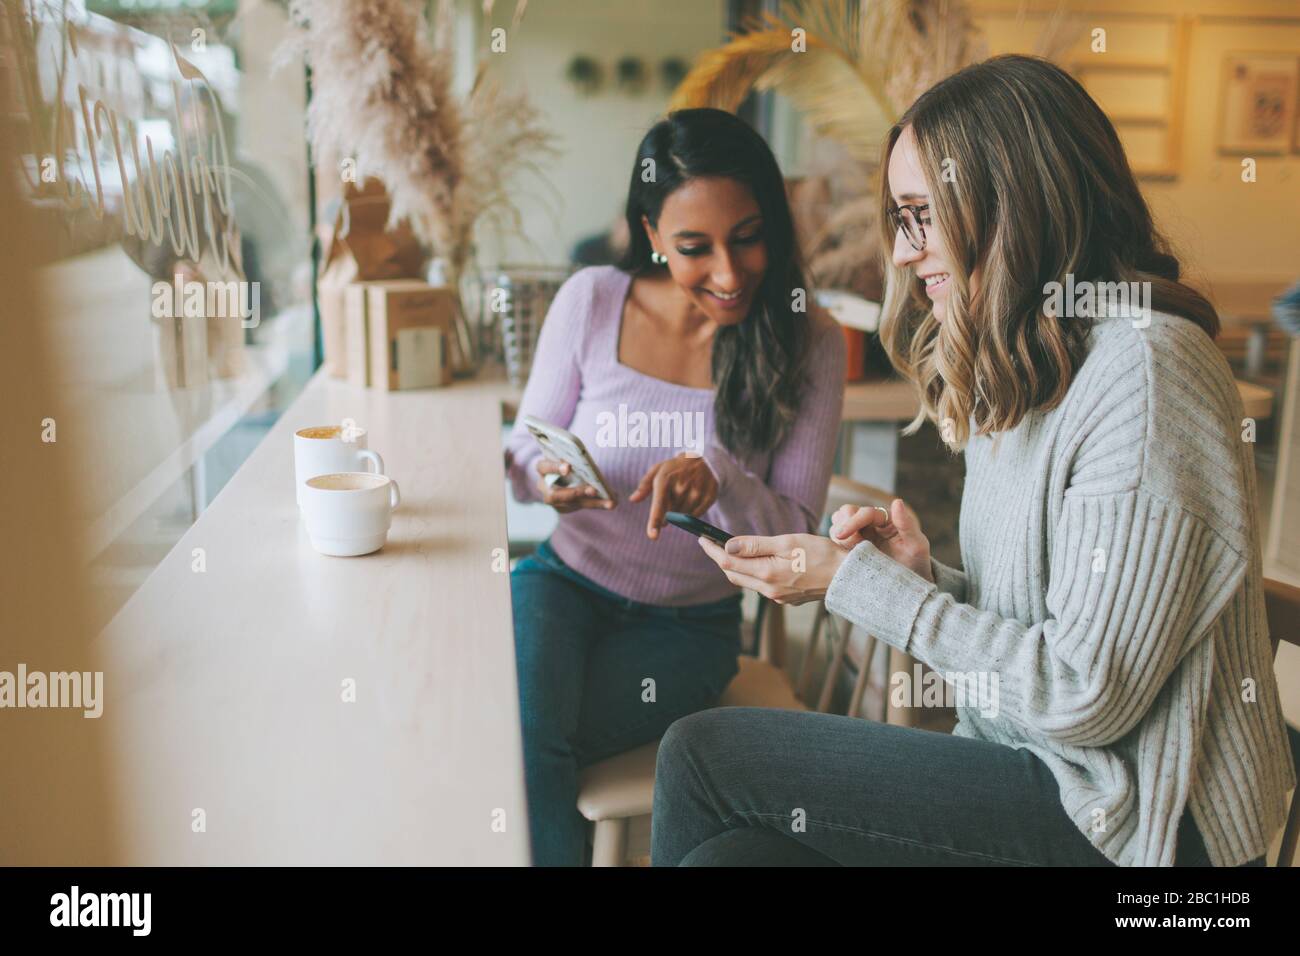 Two women using smartphones in a cafe Stock Photo